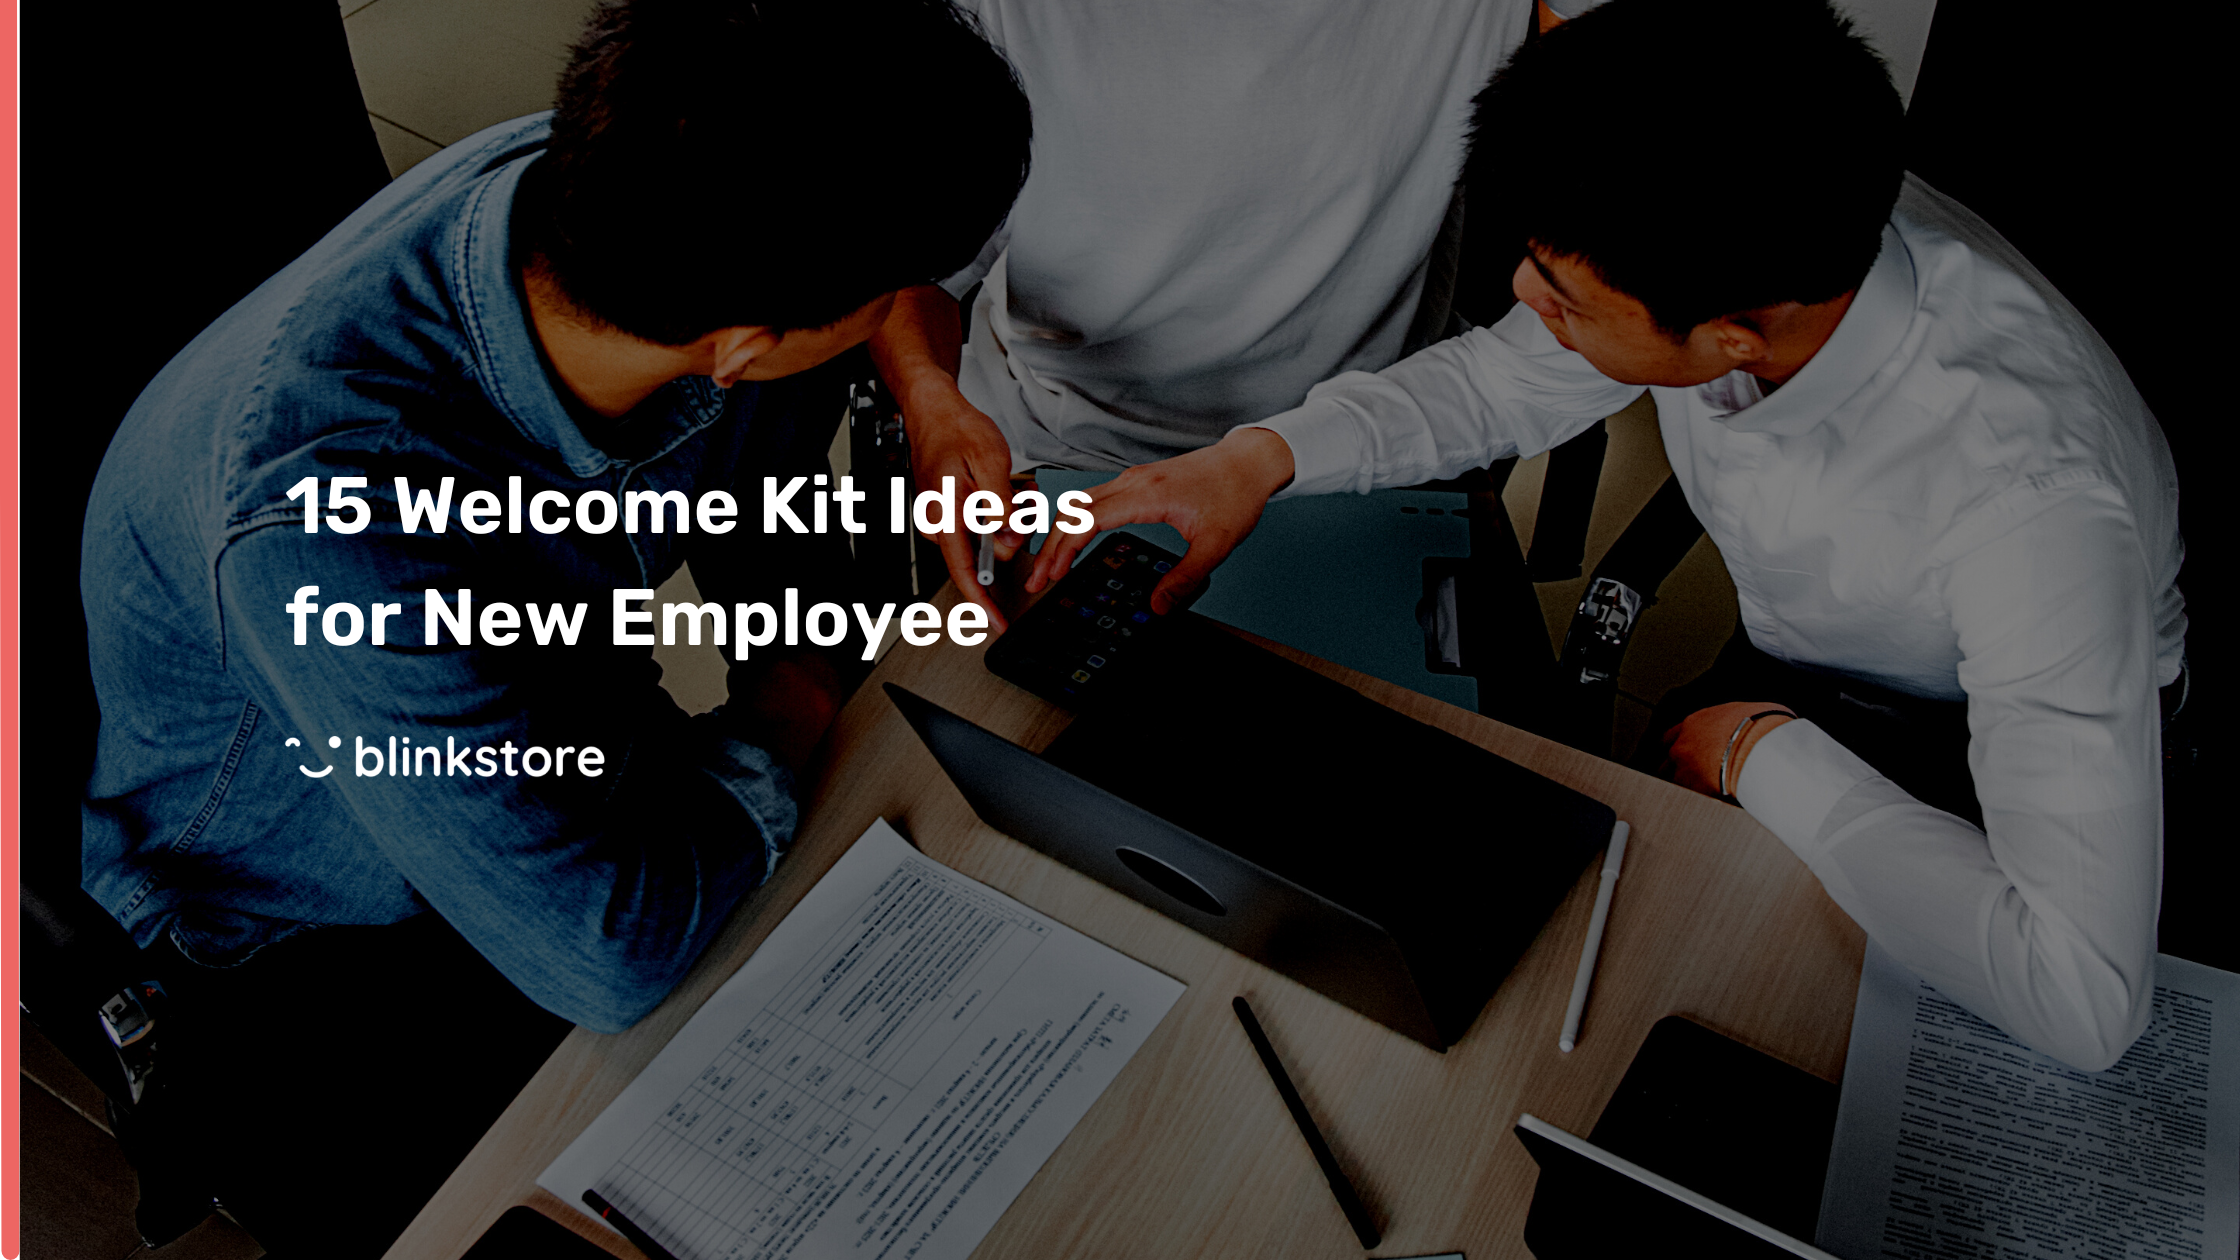 15 Welcome Kit Ideas for New Employee